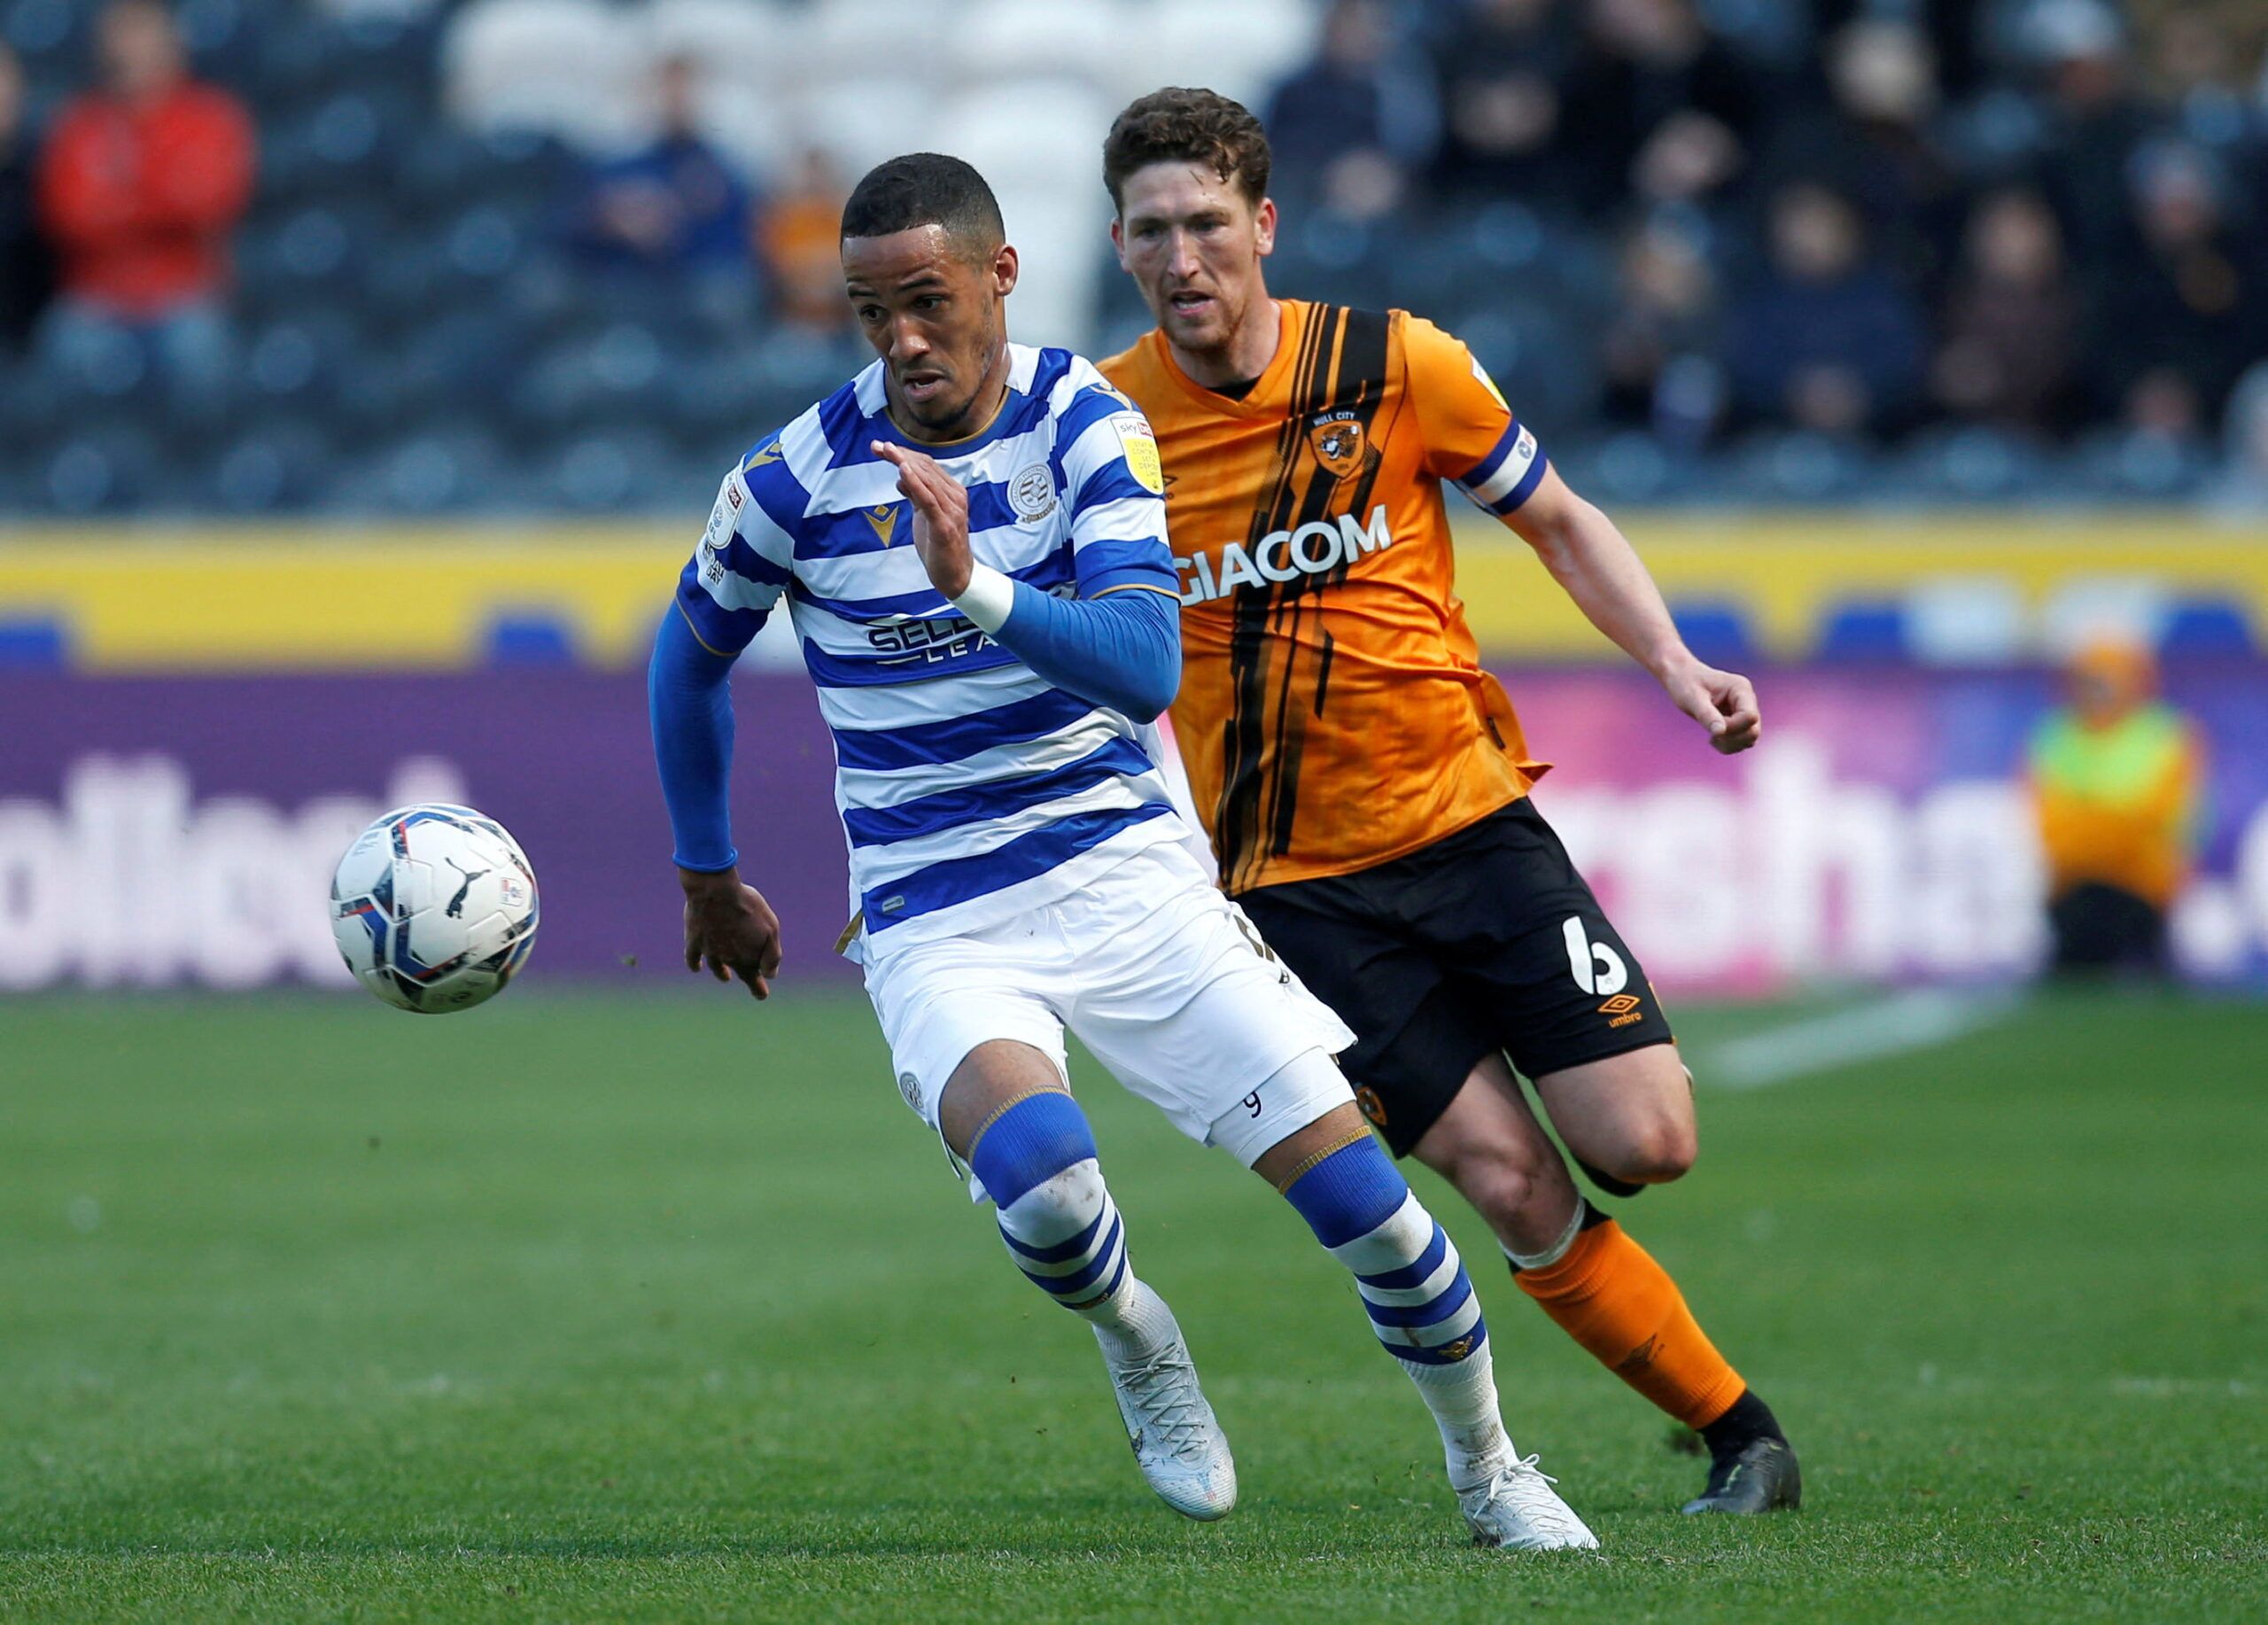 Soccer Football - Championship - Hull City v Reading - MKM Stadium, Hull, Britain - April 23, 2022 Reading's Tom Ince in action with Hull City's Richie Smallwood  Action Images/Ed Sykes  EDITORIAL USE ONLY. No use with unauthorized audio, video, data, fixture lists, club/league logos or 